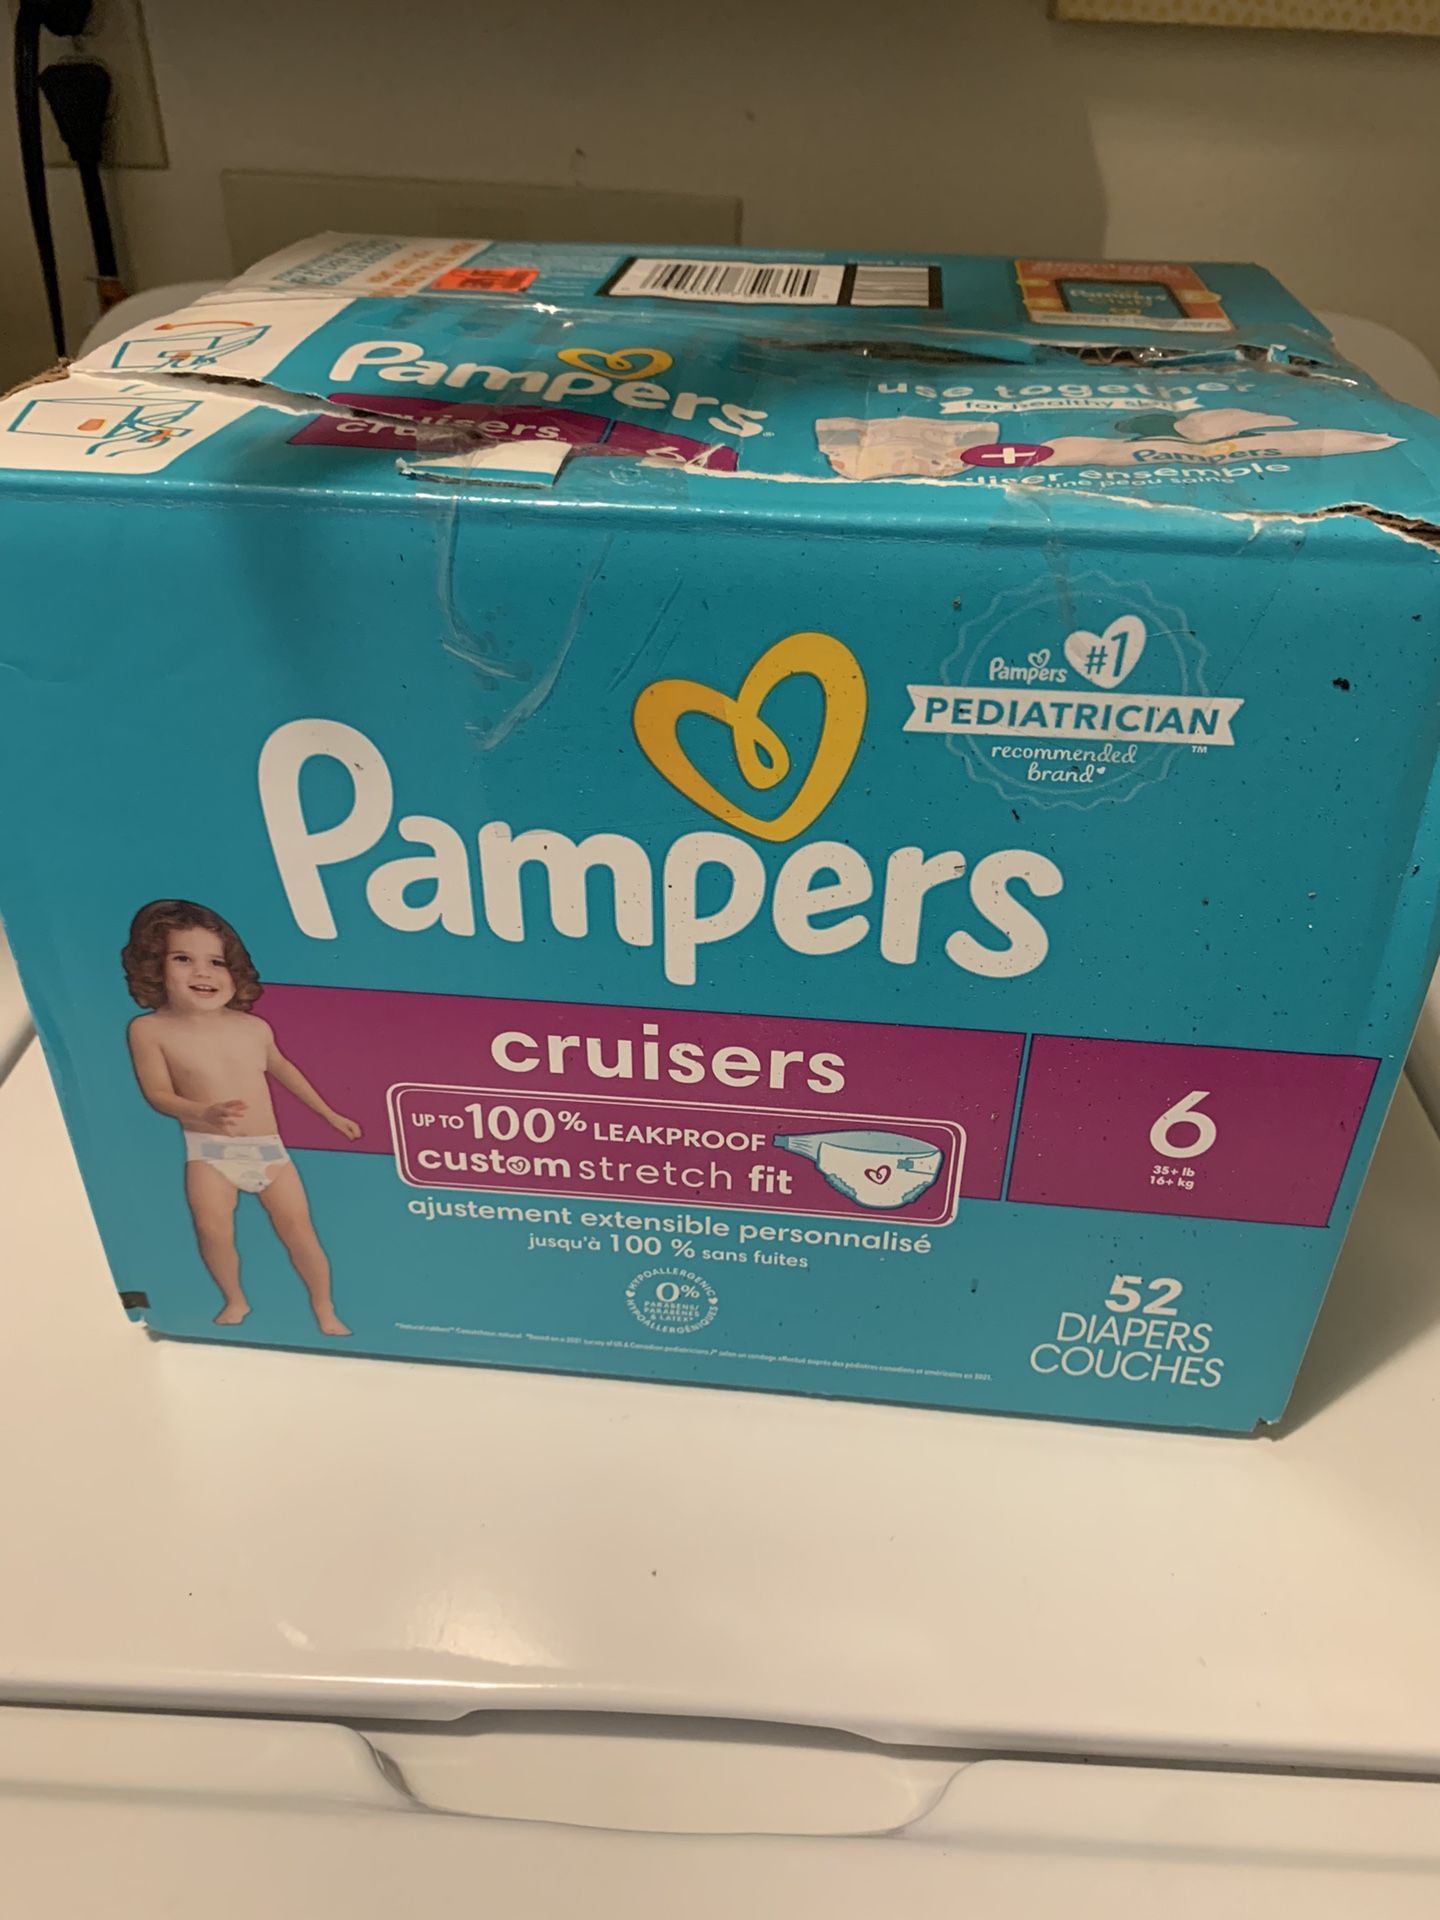 Unopened Diapers Damaged Box